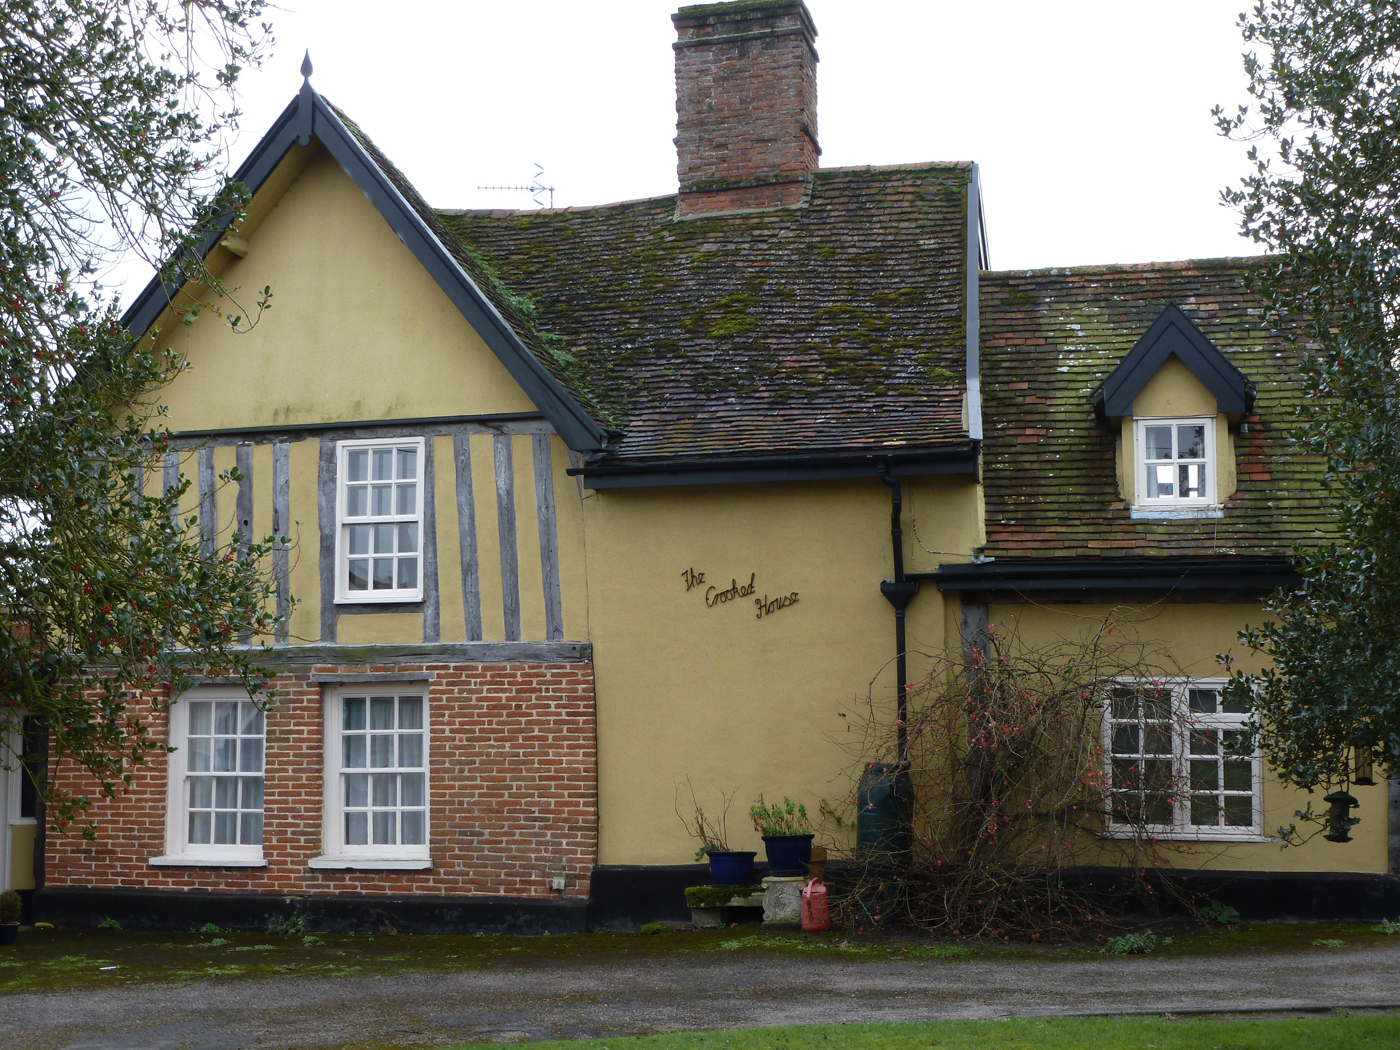 Crooked House,High St,Spring Ln